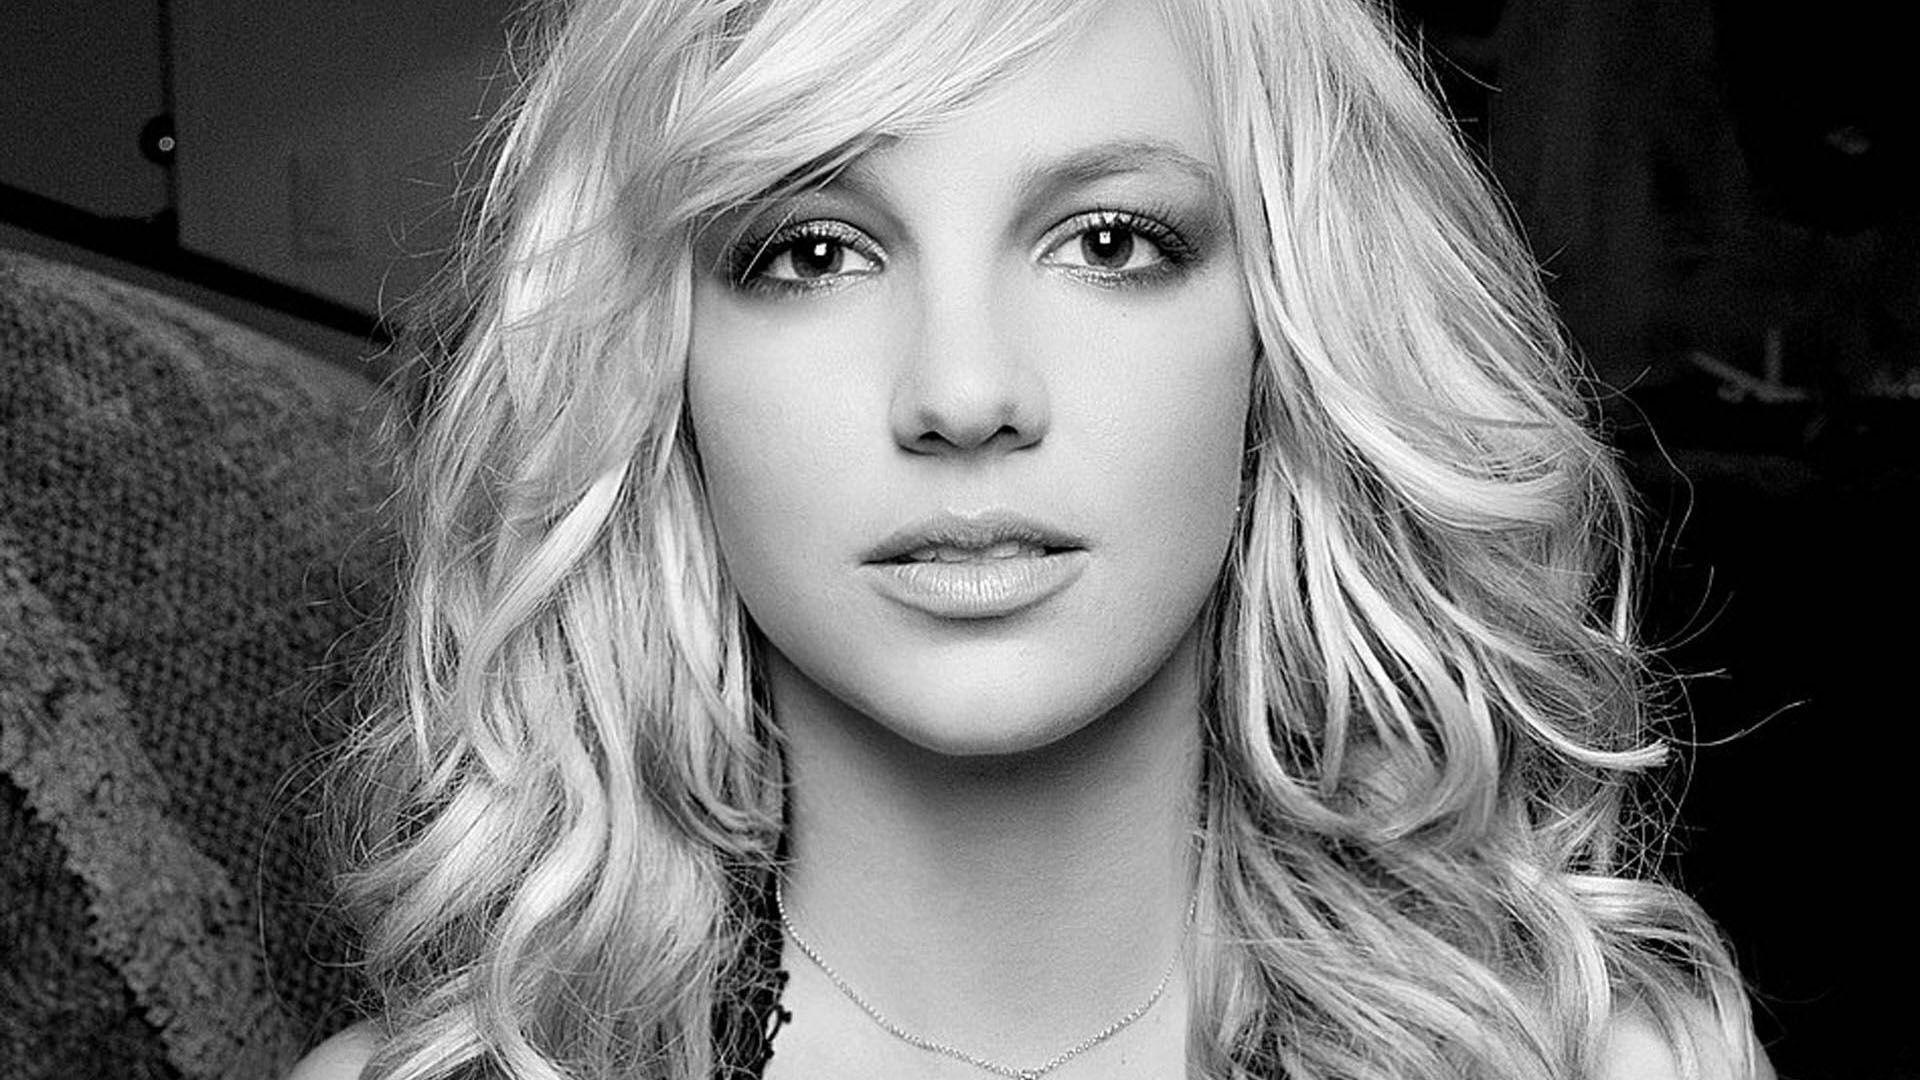 Britney Spears Wallpaper High Resolution and Quality Download